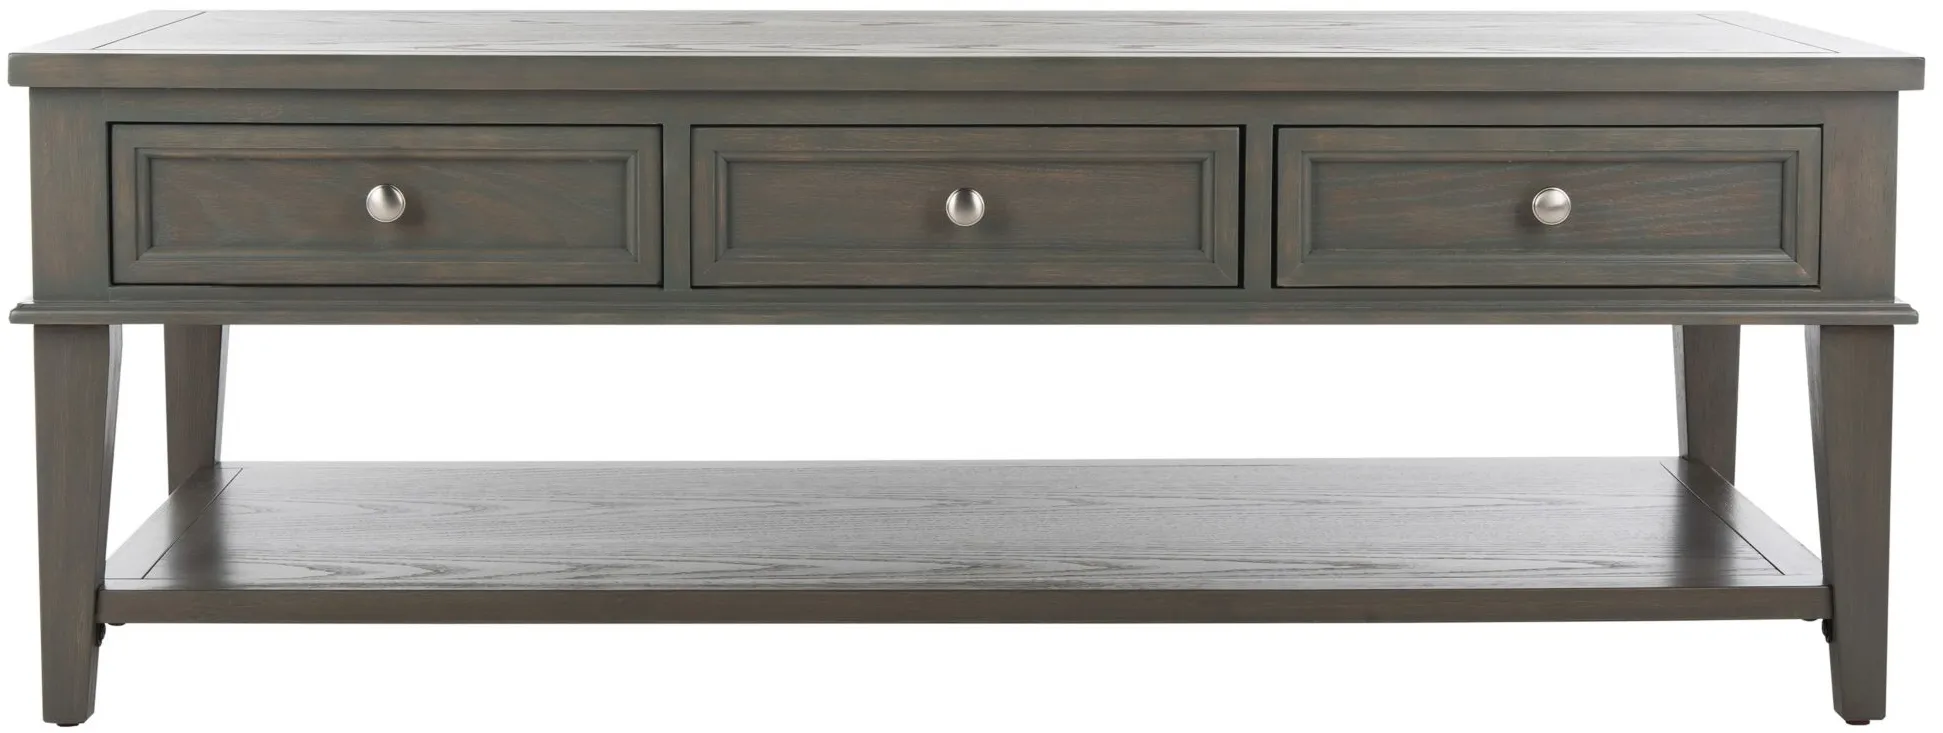 Lucille Coffee Table With Storage Drawers in Ash Gray by Safavieh